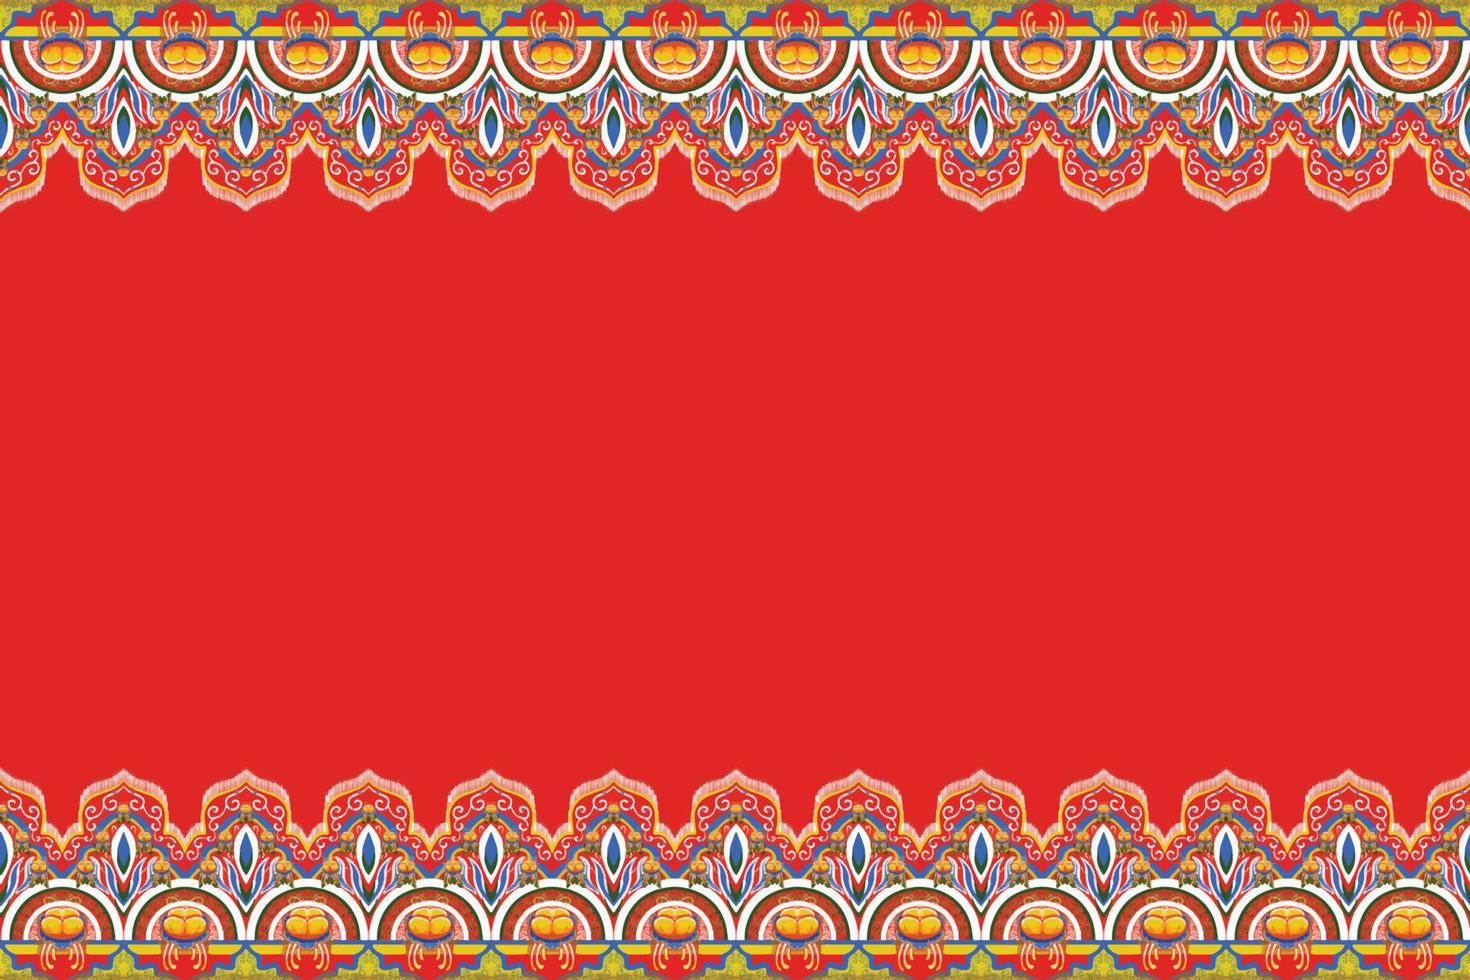 Yellow, Blue, Flower on Orange Red. Geometric ethnic oriental pattern traditional Design for background,carpet,wallpaper,clothing,wrapping,Batik,fabric, vector illustration embroidery style